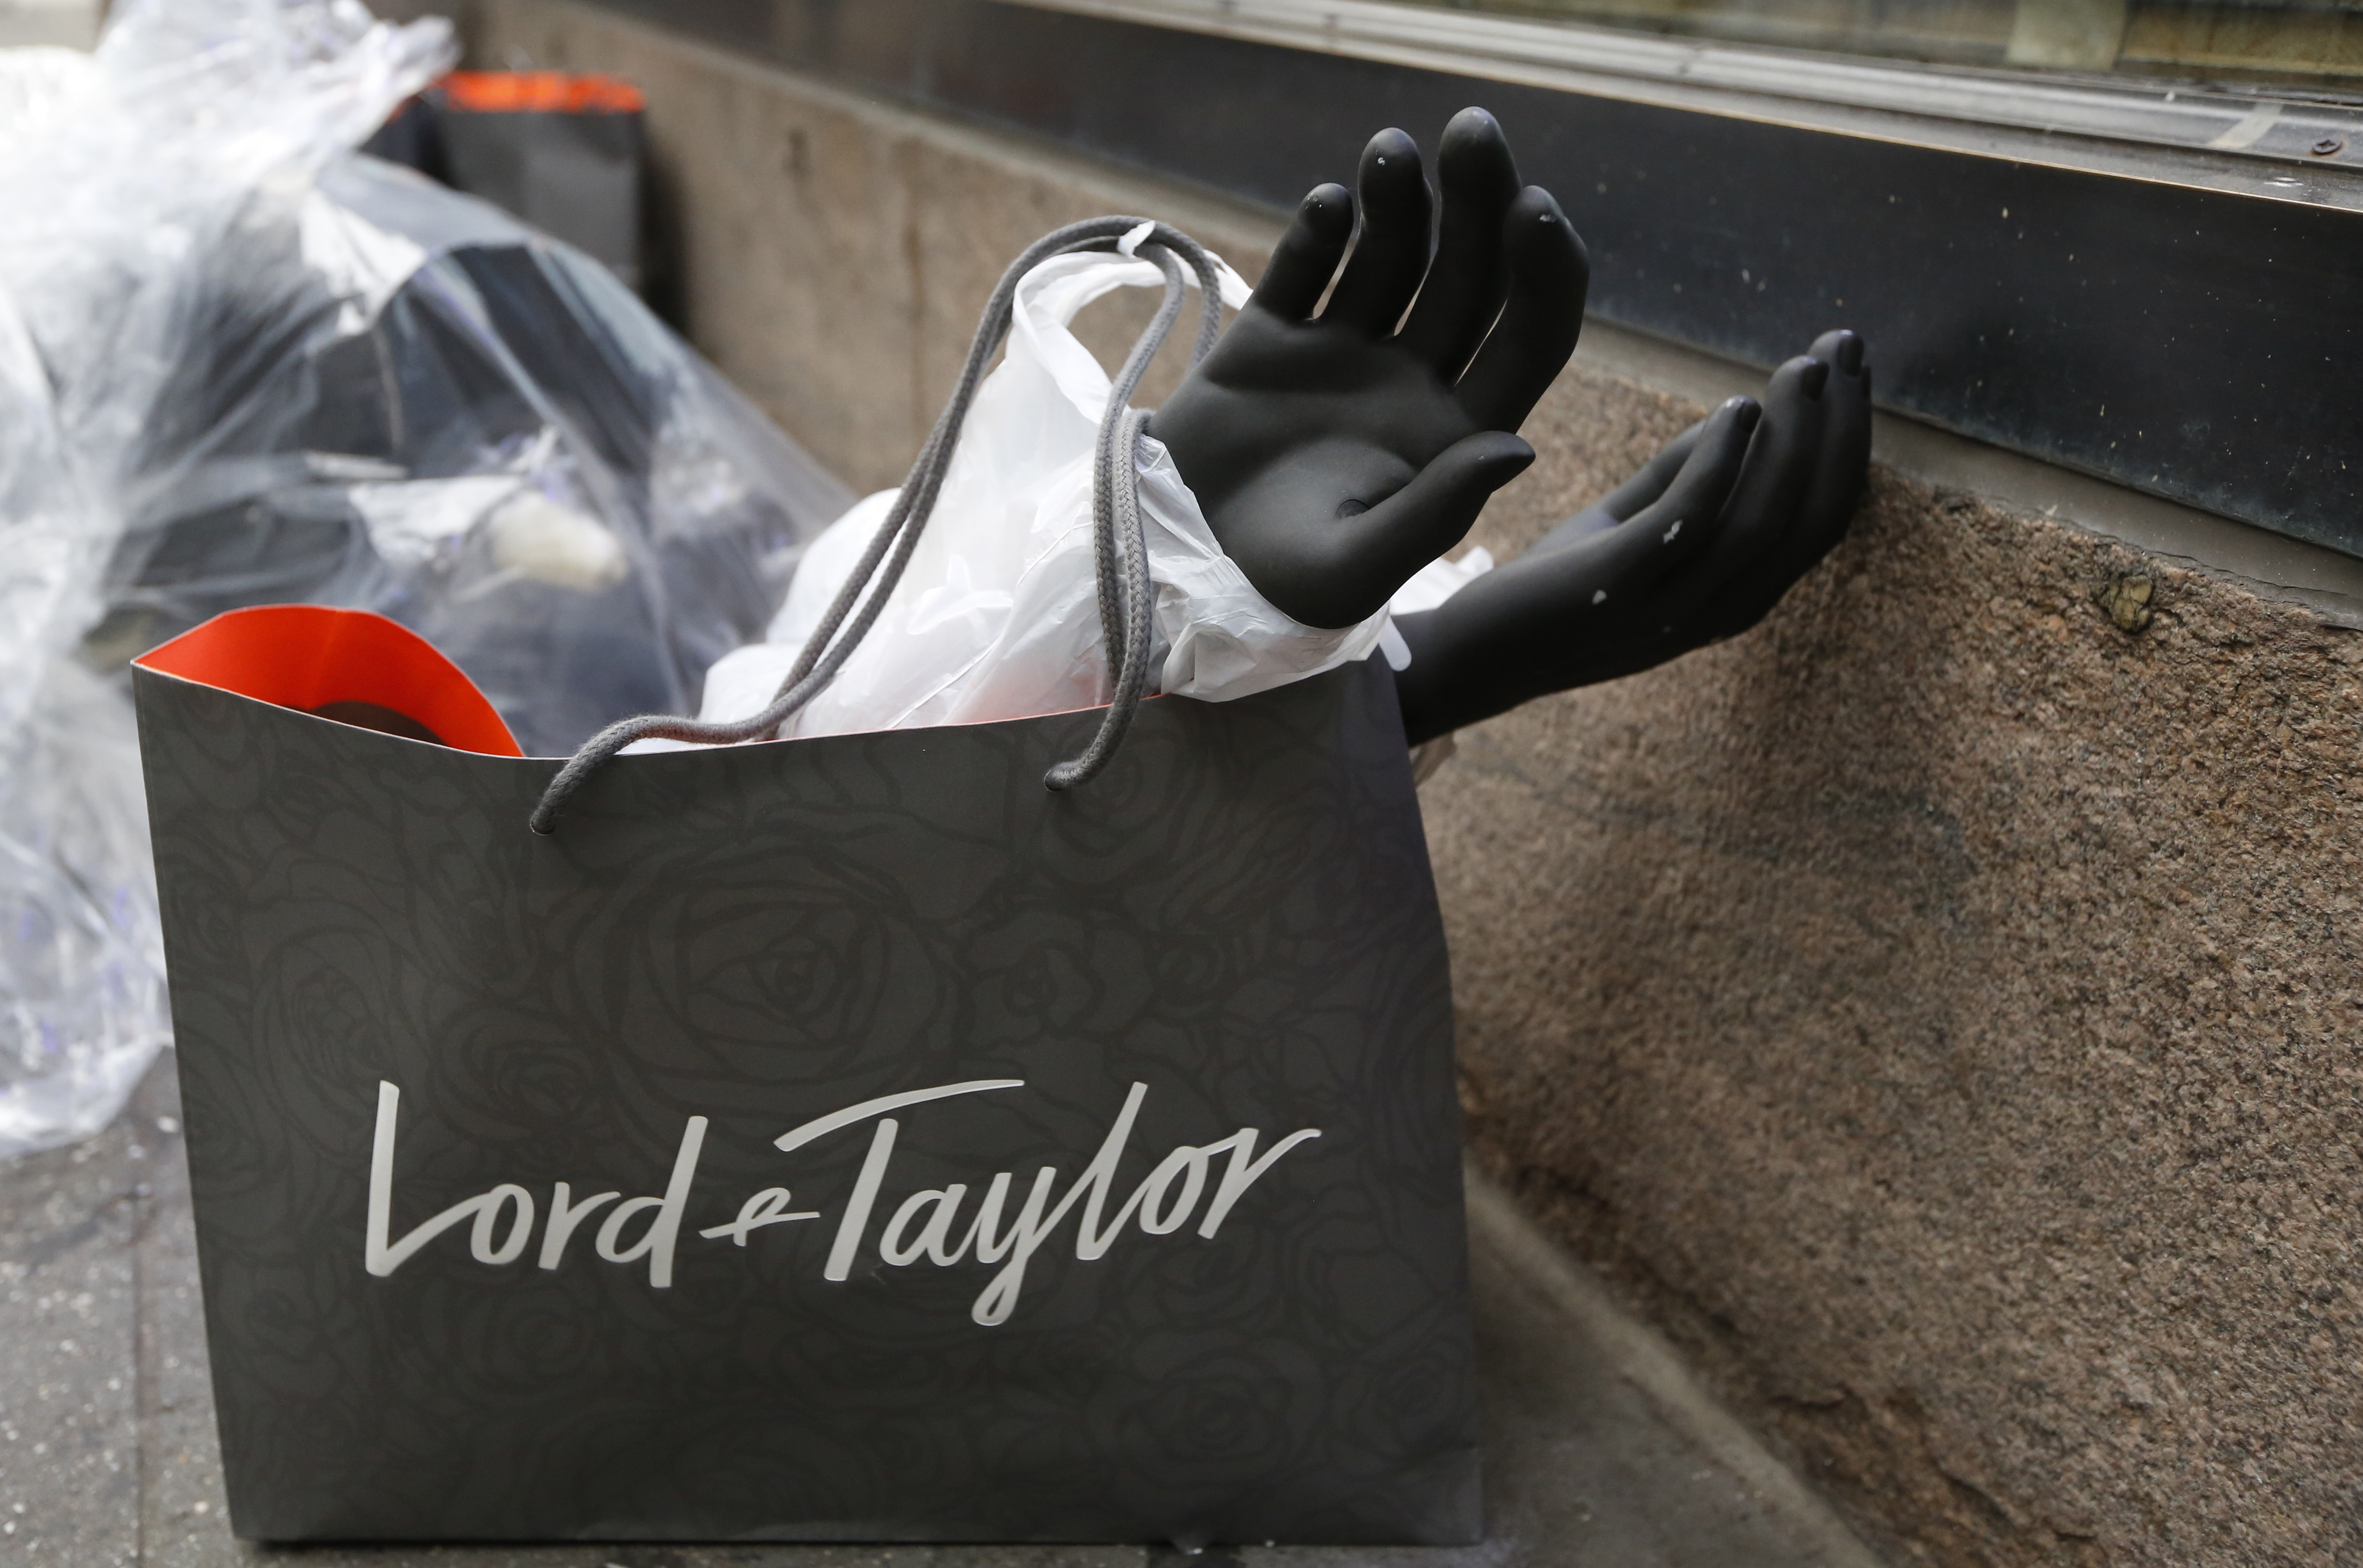 After nearly 200 years, Lord & Taylor goes out of business